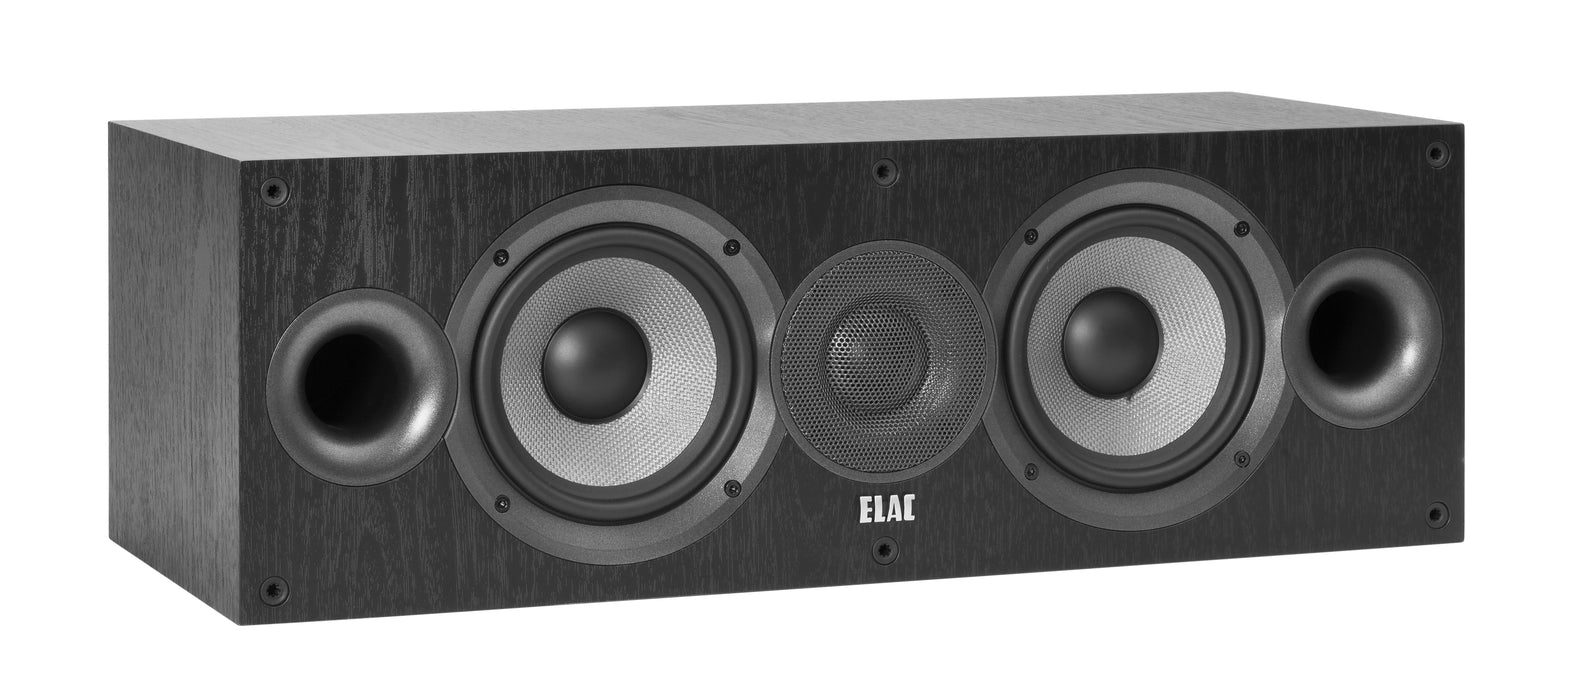 Elac Debut 2.0 5-1/4" Center Speaker (Each) - Speakers - ELAC - Topchoice Electronics